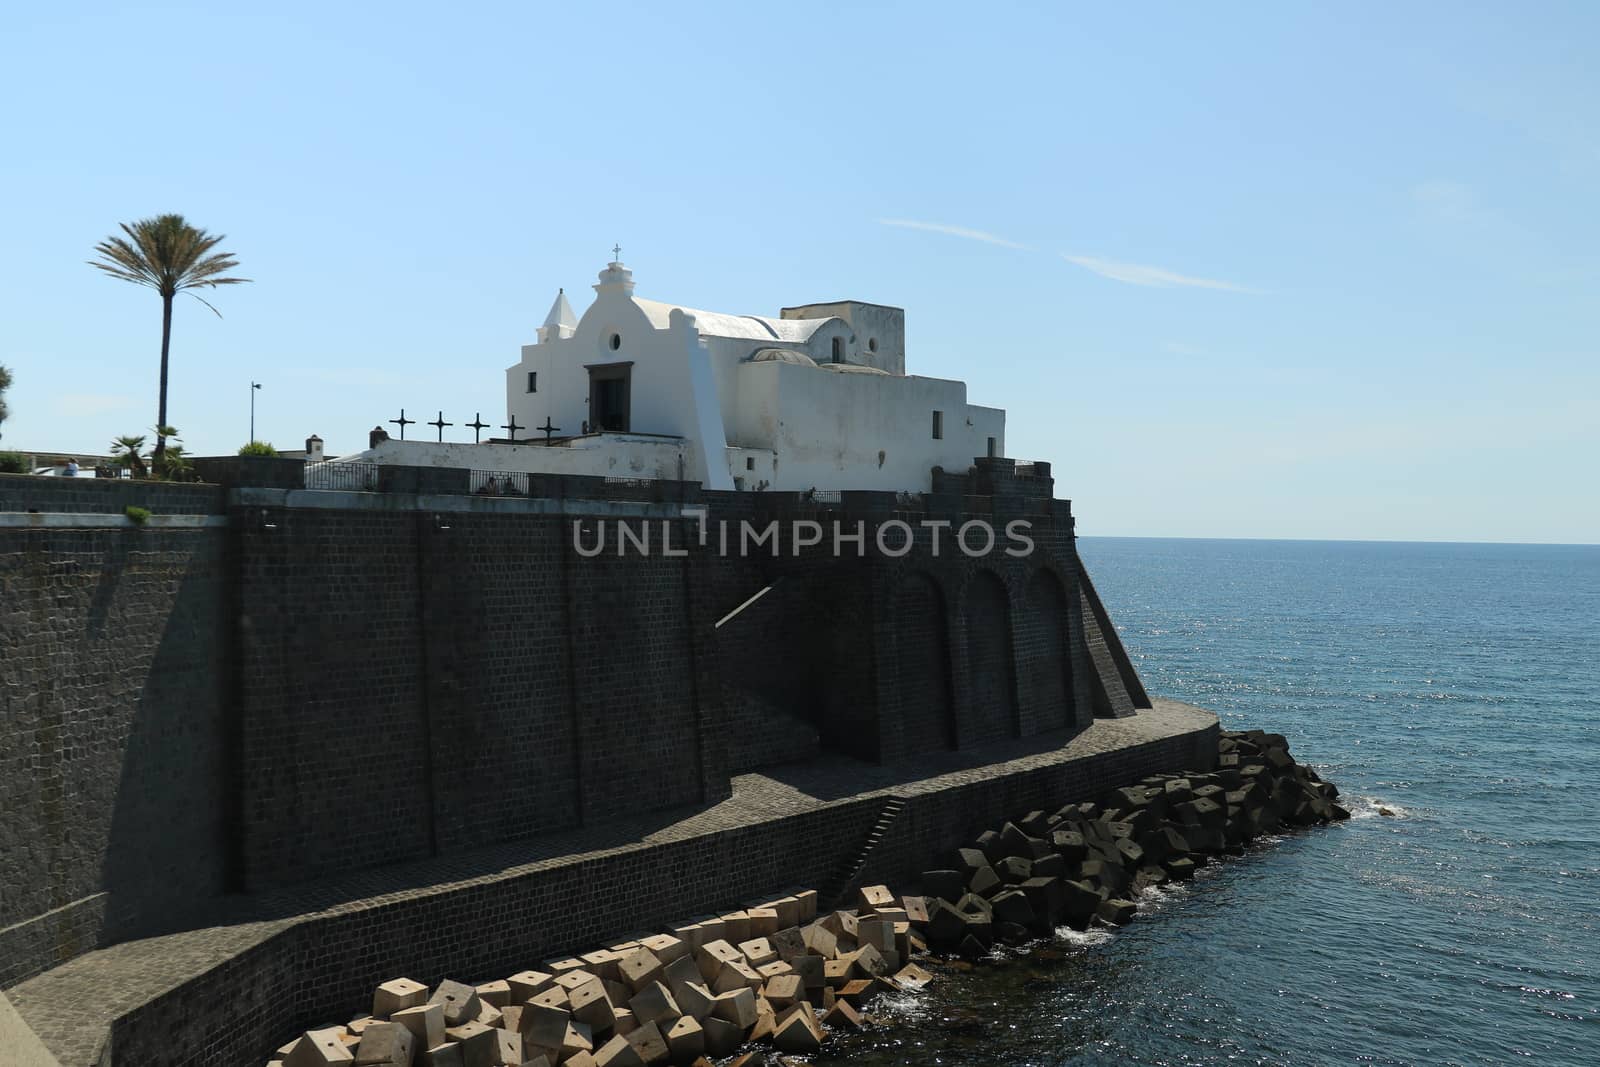 Church of Soccorso in Forio on the island of Ischia near Naples. Example of typical Mediterranean architecture rises above the sea.